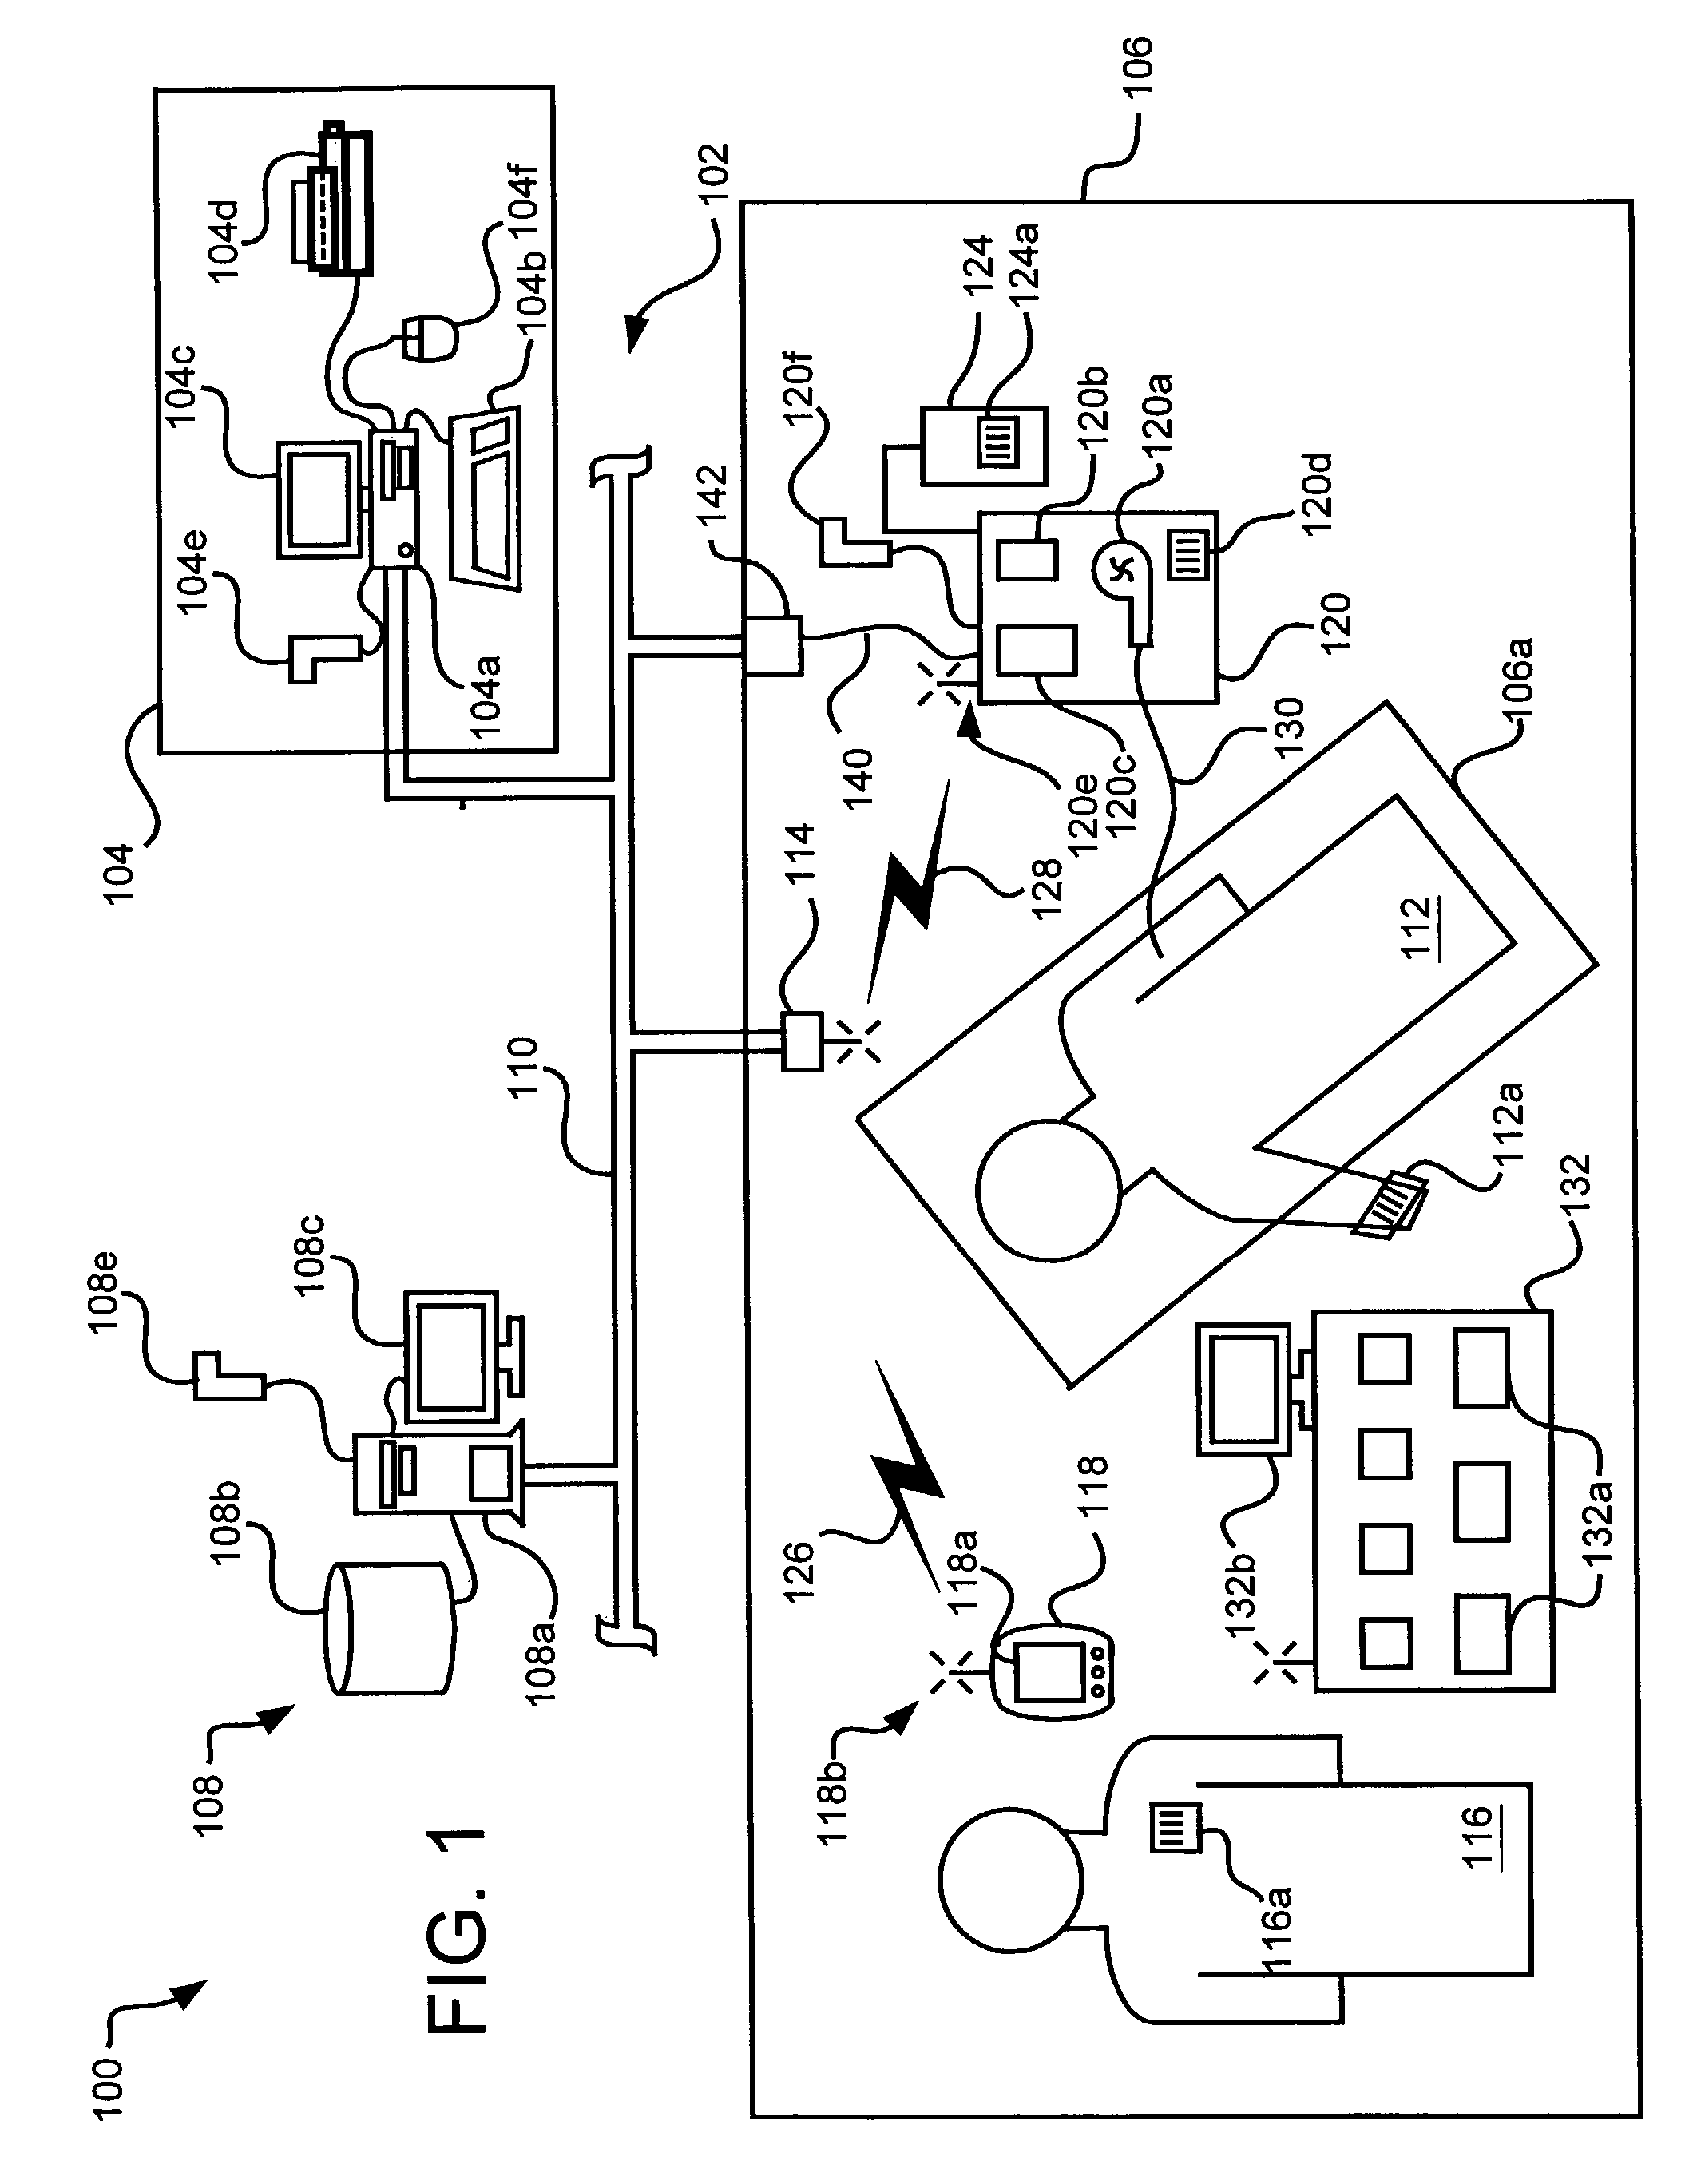 System and method for identifying data streams associated with medical equipment